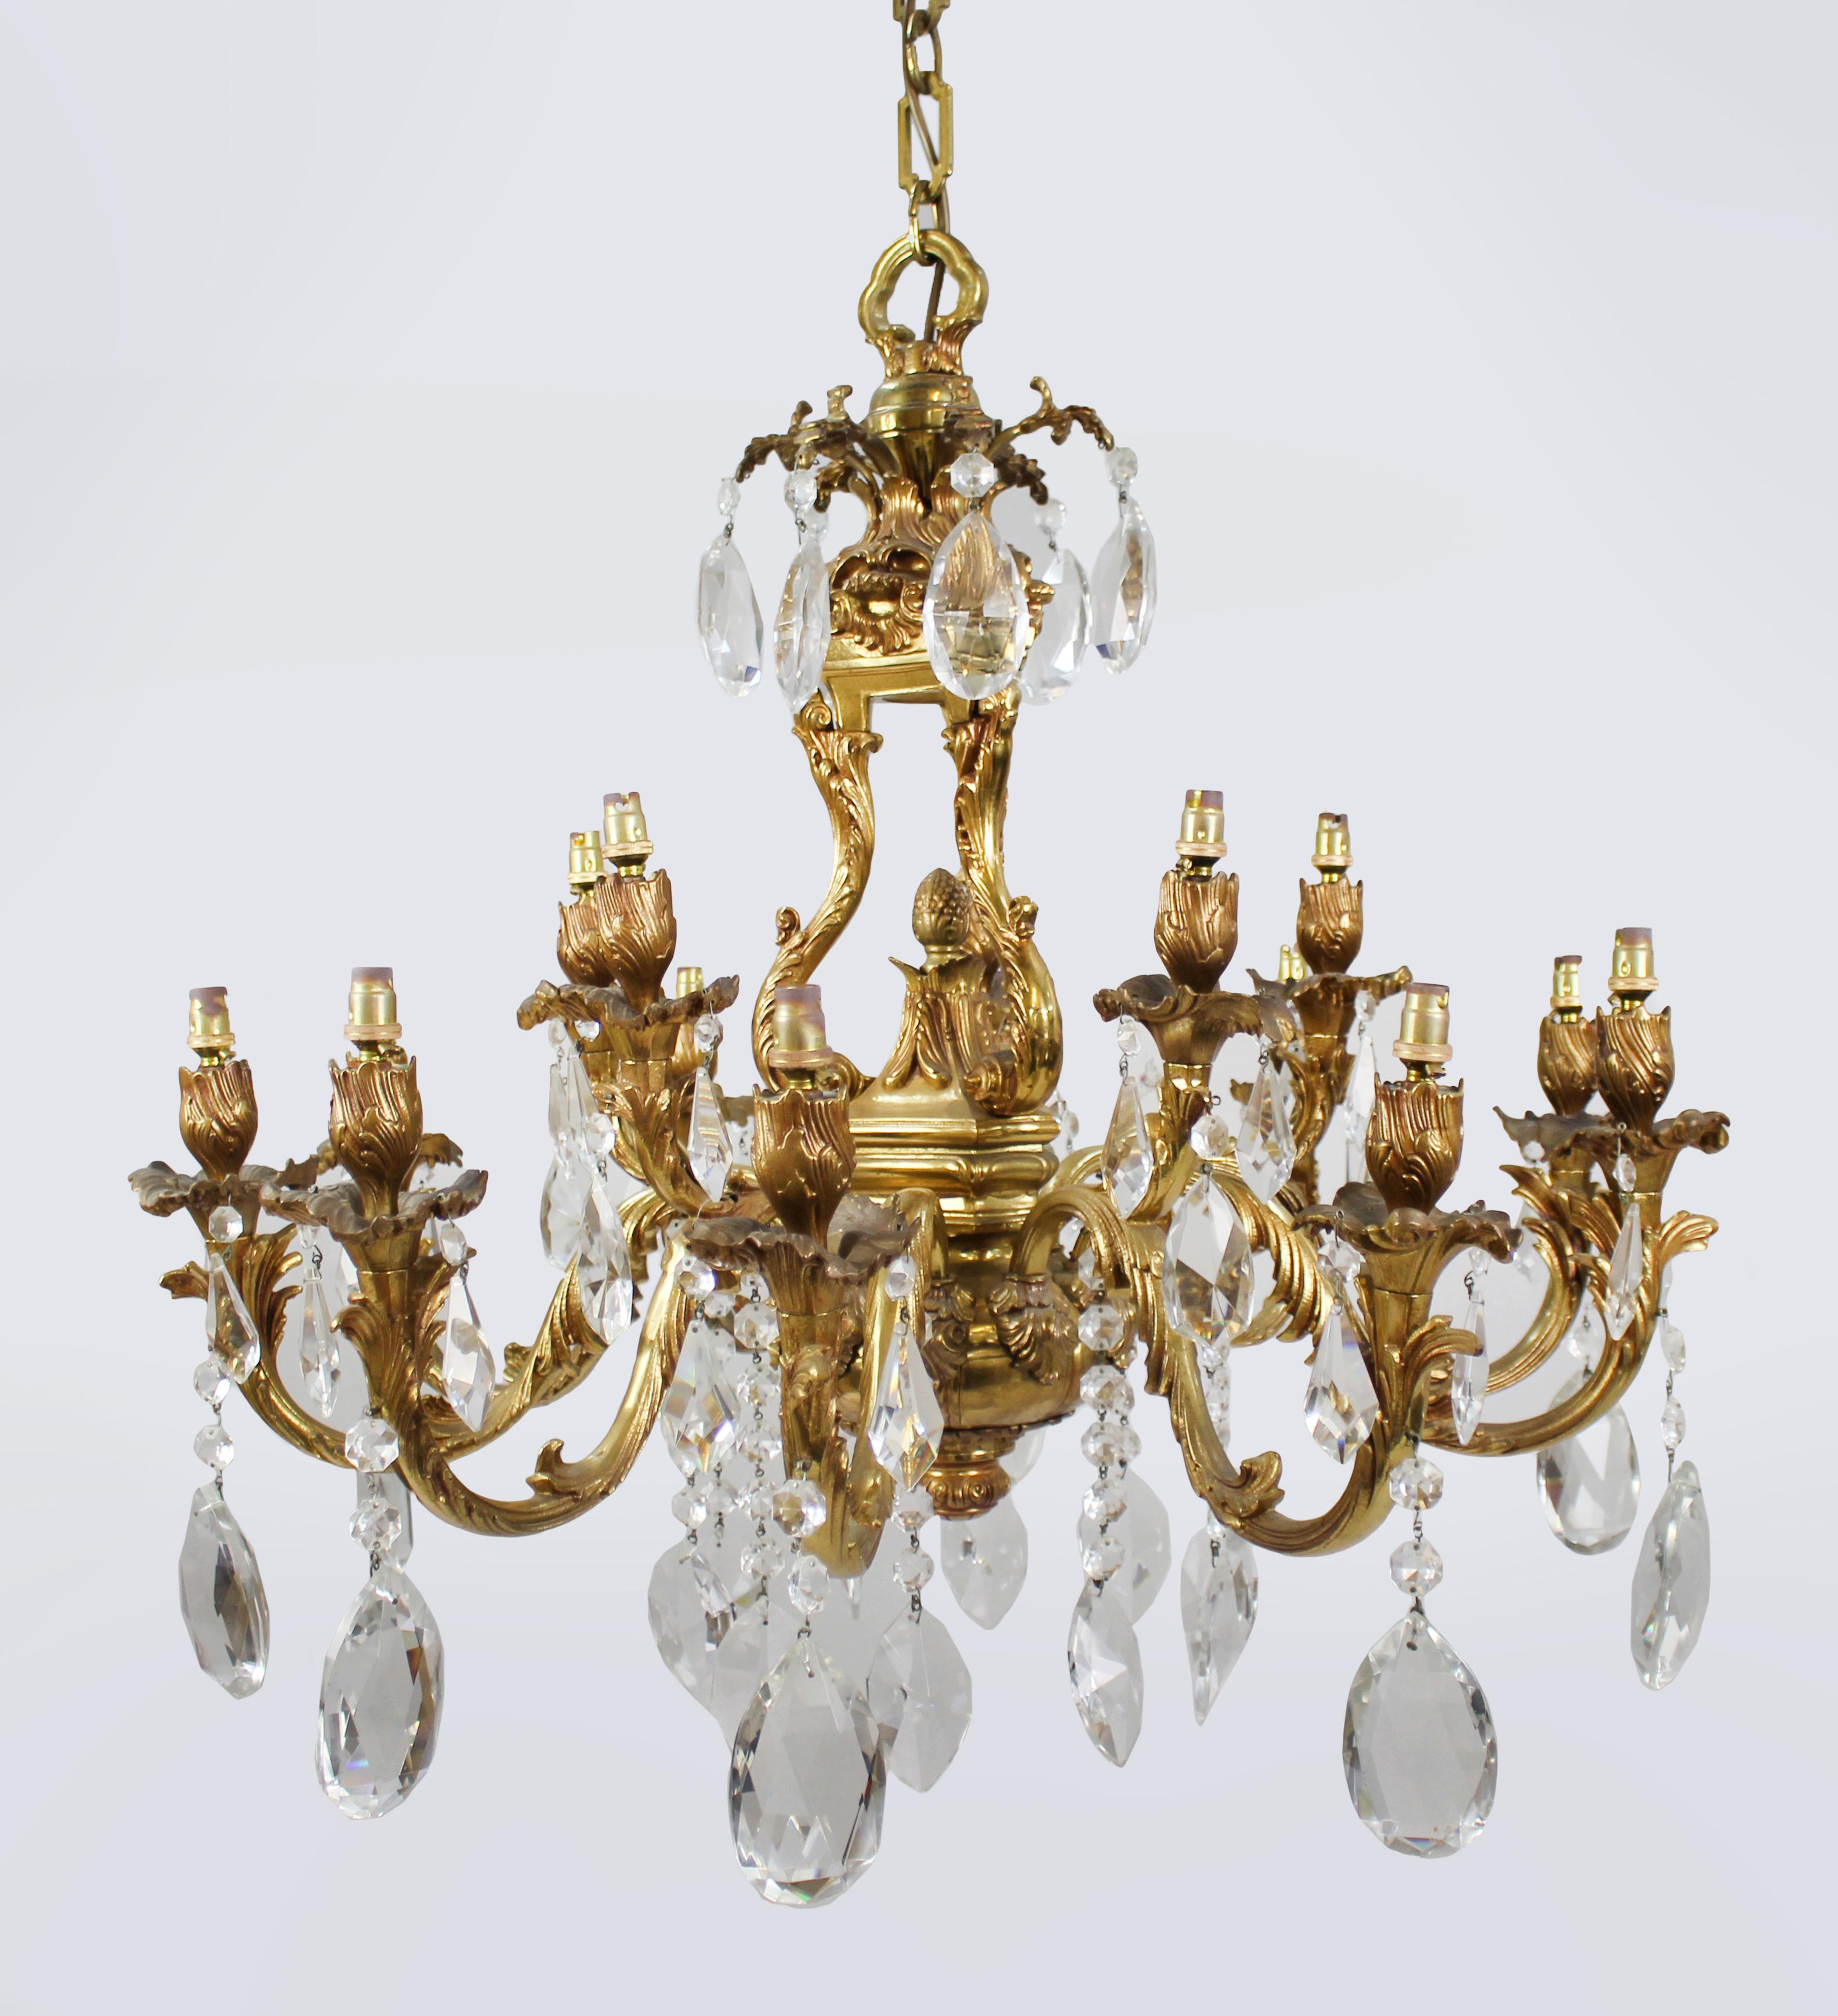 Impressive French Gilt Metal Two Tier 15 Light Chandelier


20th c., French, c.1930

Heavy gilt metal frame. Dressed with high quality cut crystal droppers

Width: 78 cm / 30 3/4 in

Drop (excluding chain): 76 cm / 30 in

Very good condition.